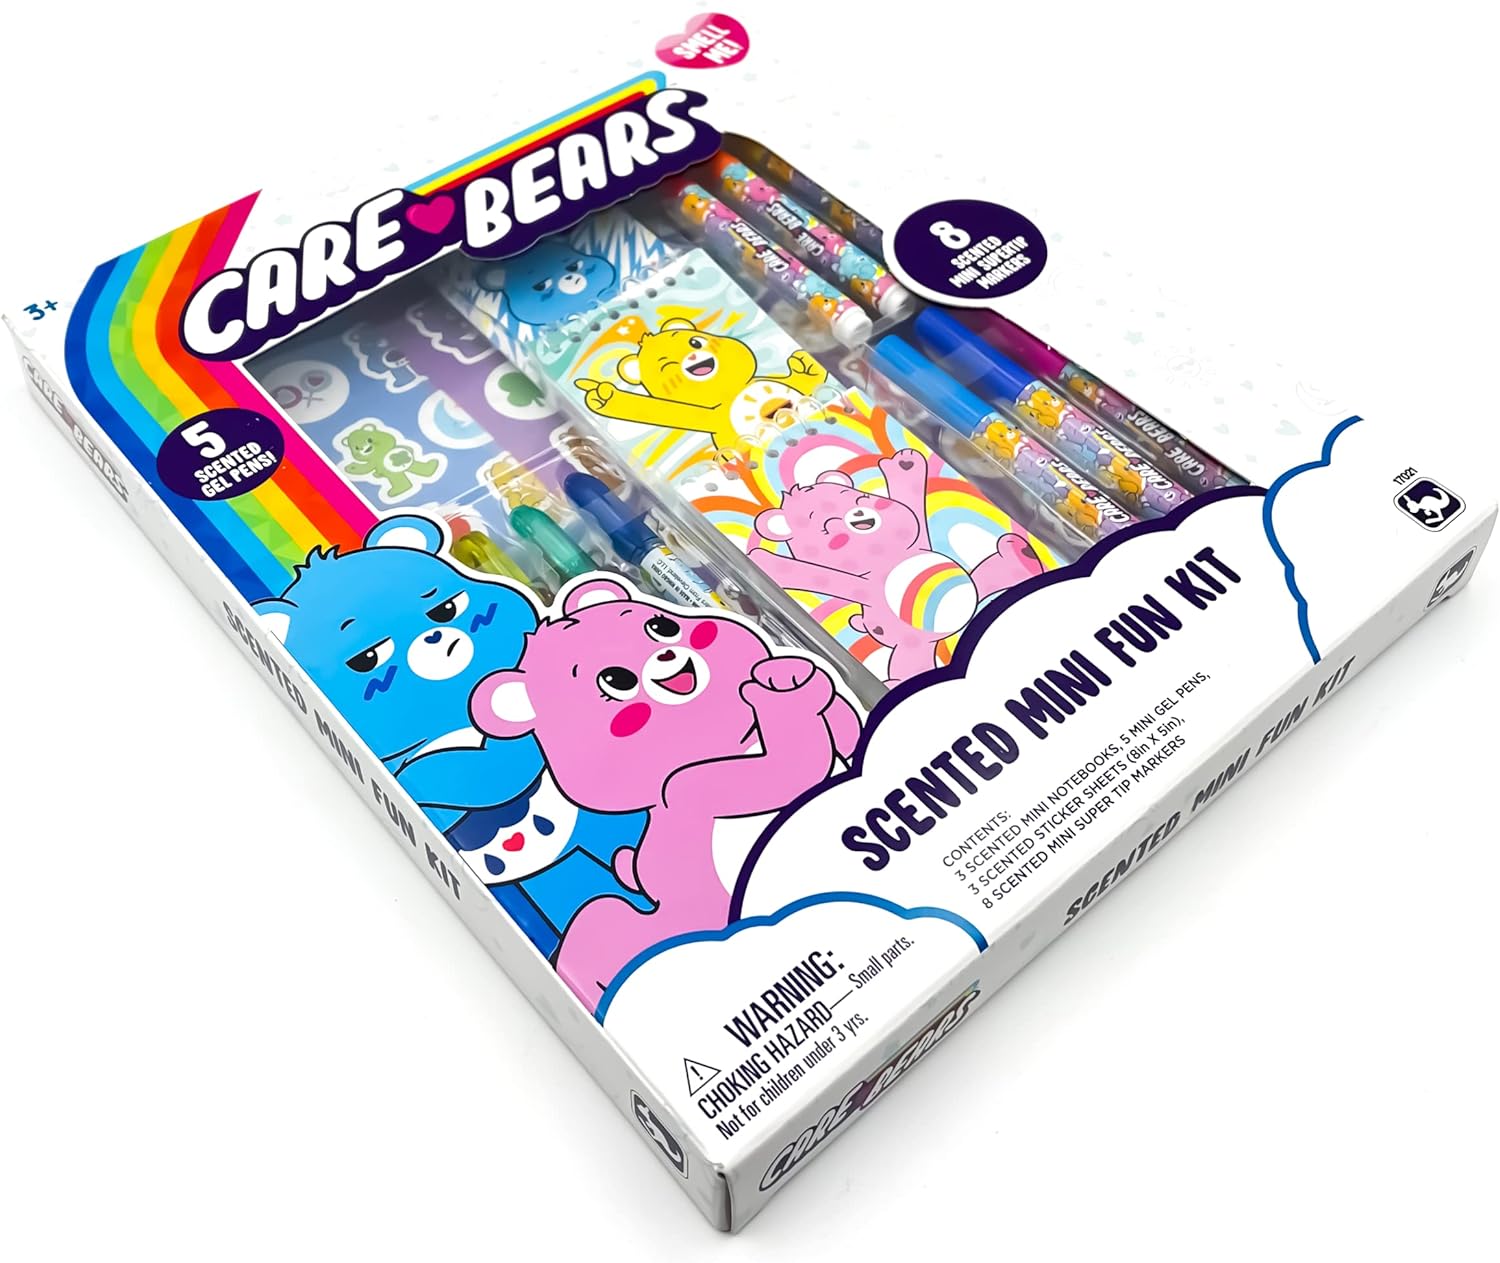 Scenticorns Care Bears Mini Fun Kit - Fruity Scented Sheets, Super Tip Markers - Take Care Bears on The go for Travel and Creative Play for Kids Playtime